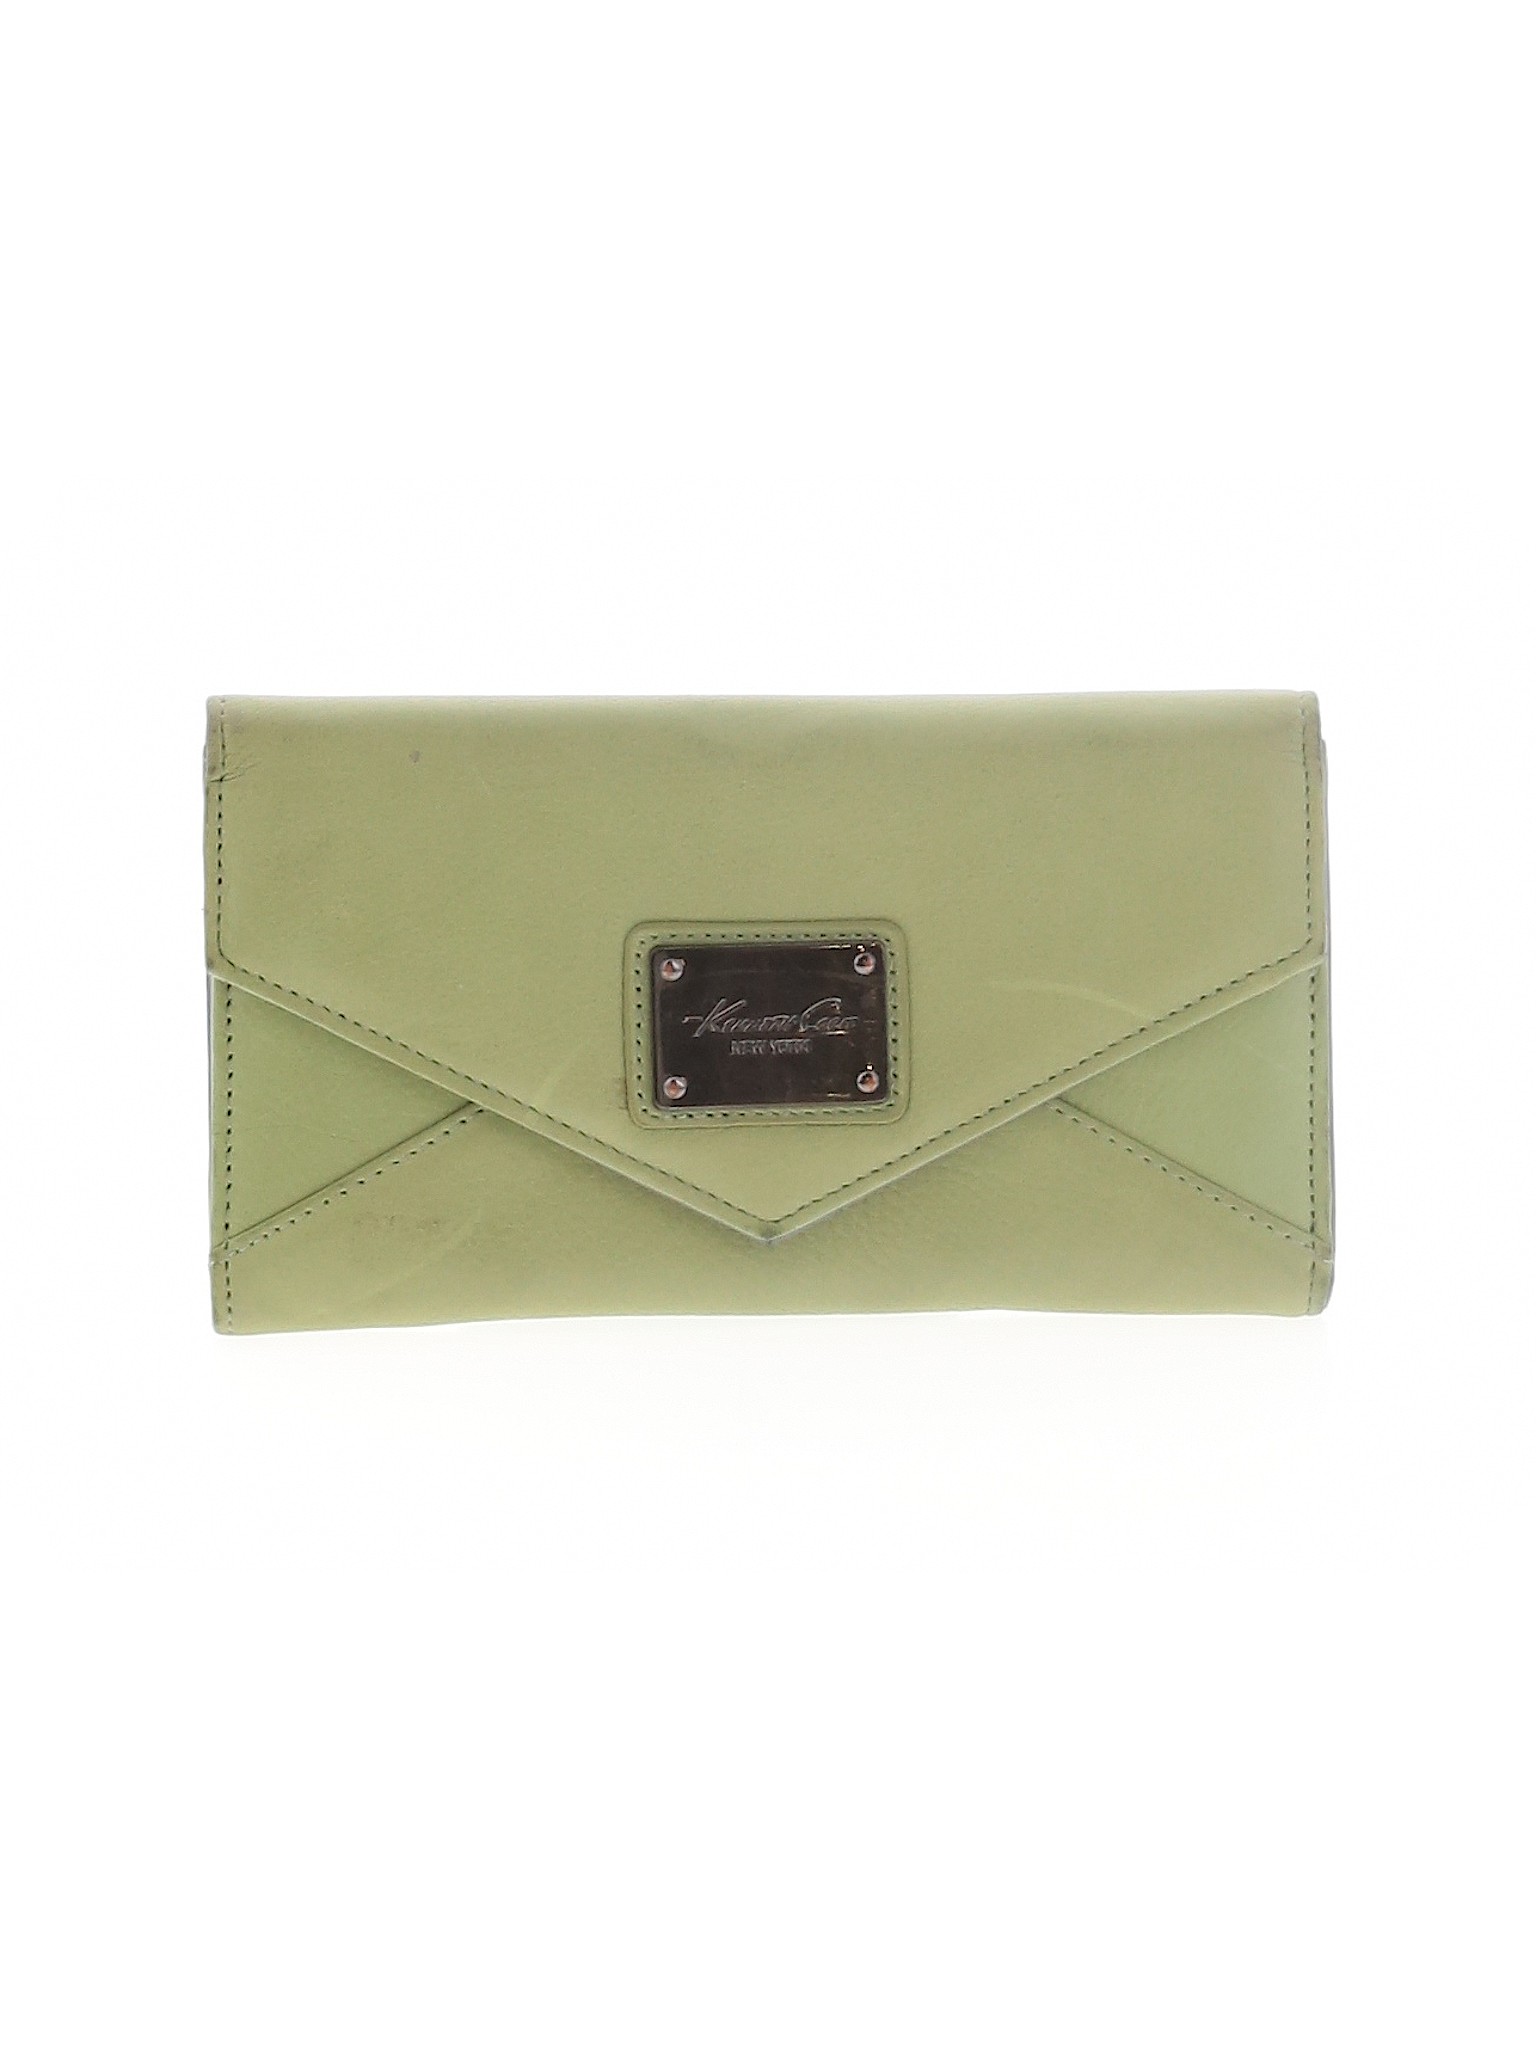 Kenneth Cole New York Women Green Leather Wallet One Size | eBay